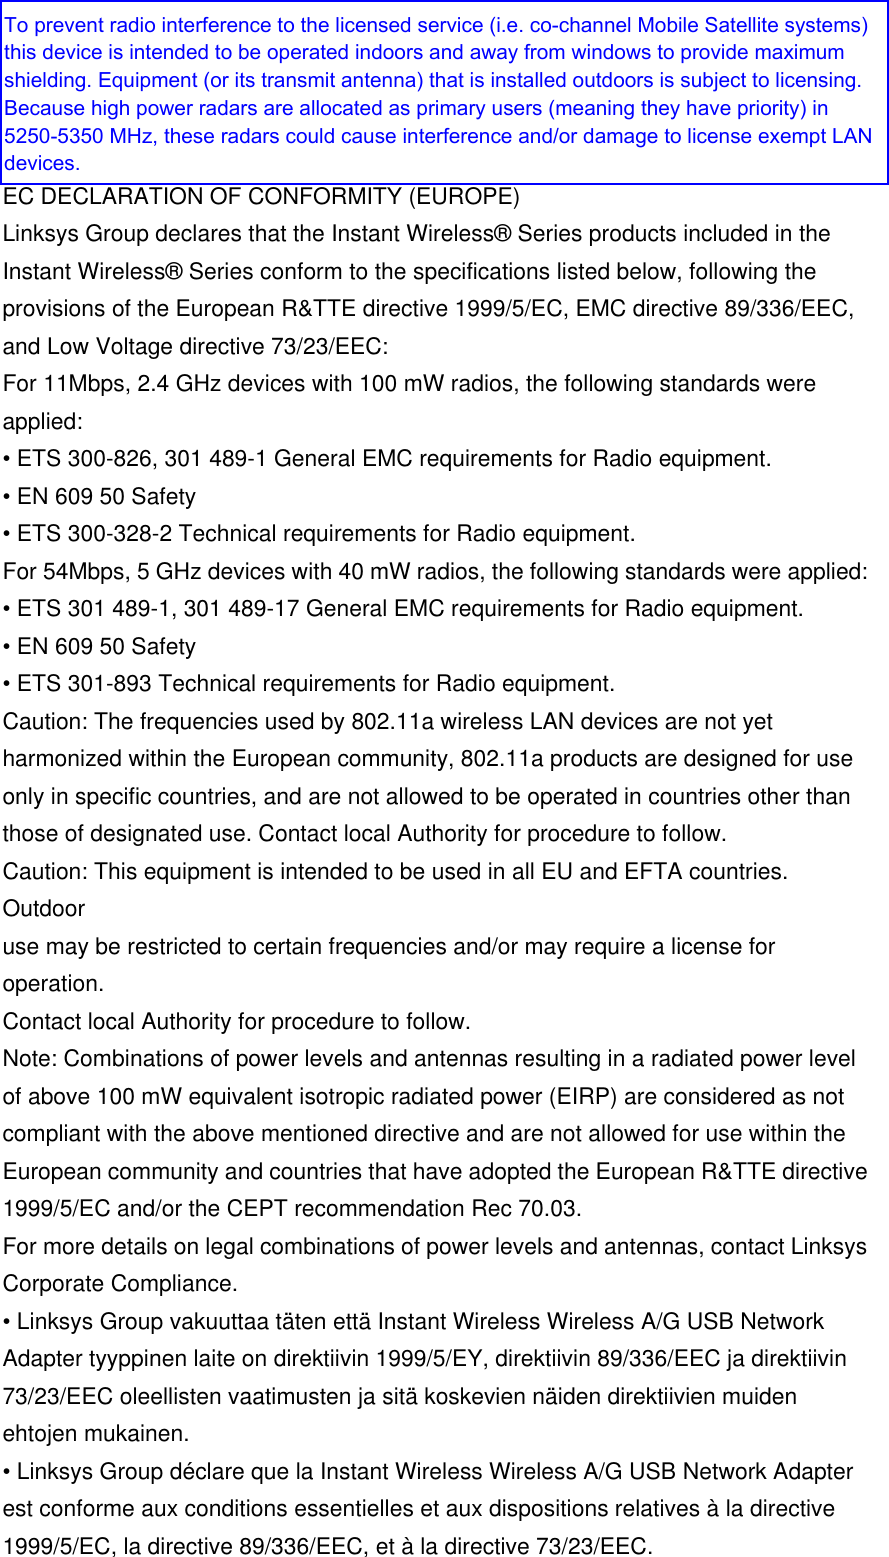  EC DECLARATION OF CONFORMITY (EUROPE) Linksys Group declares that the Instant Wireless® Series products included in the Instant Wireless® Series conform to the specifications listed below, following the provisions of the European R&amp;TTE directive 1999/5/EC, EMC directive 89/336/EEC, and Low Voltage directive 73/23/EEC: For 11Mbps, 2.4 GHz devices with 100 mW radios, the following standards were applied: • ETS 300-826, 301 489-1 General EMC requirements for Radio equipment. • EN 609 50 Safety • ETS 300-328-2 Technical requirements for Radio equipment. For 54Mbps, 5 GHz devices with 40 mW radios, the following standards were applied: • ETS 301 489-1, 301 489-17 General EMC requirements for Radio equipment. • EN 609 50 Safety • ETS 301-893 Technical requirements for Radio equipment. Caution: The frequencies used by 802.11a wireless LAN devices are not yet harmonized within the European community, 802.11a products are designed for use only in specific countries, and are not allowed to be operated in countries other than those of designated use. Contact local Authority for procedure to follow. Caution: This equipment is intended to be used in all EU and EFTA countries. Outdoor use may be restricted to certain frequencies and/or may require a license for operation. Contact local Authority for procedure to follow. Note: Combinations of power levels and antennas resulting in a radiated power level of above 100 mW equivalent isotropic radiated power (EIRP) are considered as not compliant with the above mentioned directive and are not allowed for use within the European community and countries that have adopted the European R&amp;TTE directive 1999/5/EC and/or the CEPT recommendation Rec 70.03. For more details on legal combinations of power levels and antennas, contact Linksys Corporate Compliance. • Linksys Group vakuuttaa täten että Instant Wireless Wireless A/G USB Network Adapter tyyppinen laite on direktiivin 1999/5/EY, direktiivin 89/336/EEC ja direktiivin 73/23/EEC oleellisten vaatimusten ja sitä koskevien näiden direktiivien muiden ehtojen mukainen. • Linksys Group déclare que la Instant Wireless Wireless A/G USB Network Adapter est conforme aux conditions essentielles et aux dispositions relatives à la directive 1999/5/EC, la directive 89/336/EEC, et à la directive 73/23/EEC. To prevent radio interference to the licensed service (i.e. co-channel Mobile Satellite systems) this device is intended to be operated indoors and away from windows to provide maximum shielding. Equipment (or its transmit antenna) that is installed outdoors is subject to licensing.Because high power radars are allocated as primary users (meaning they have priority) in 5250-5350 MHz, these radars could cause interference and/or damage to license exempt LAN devices.